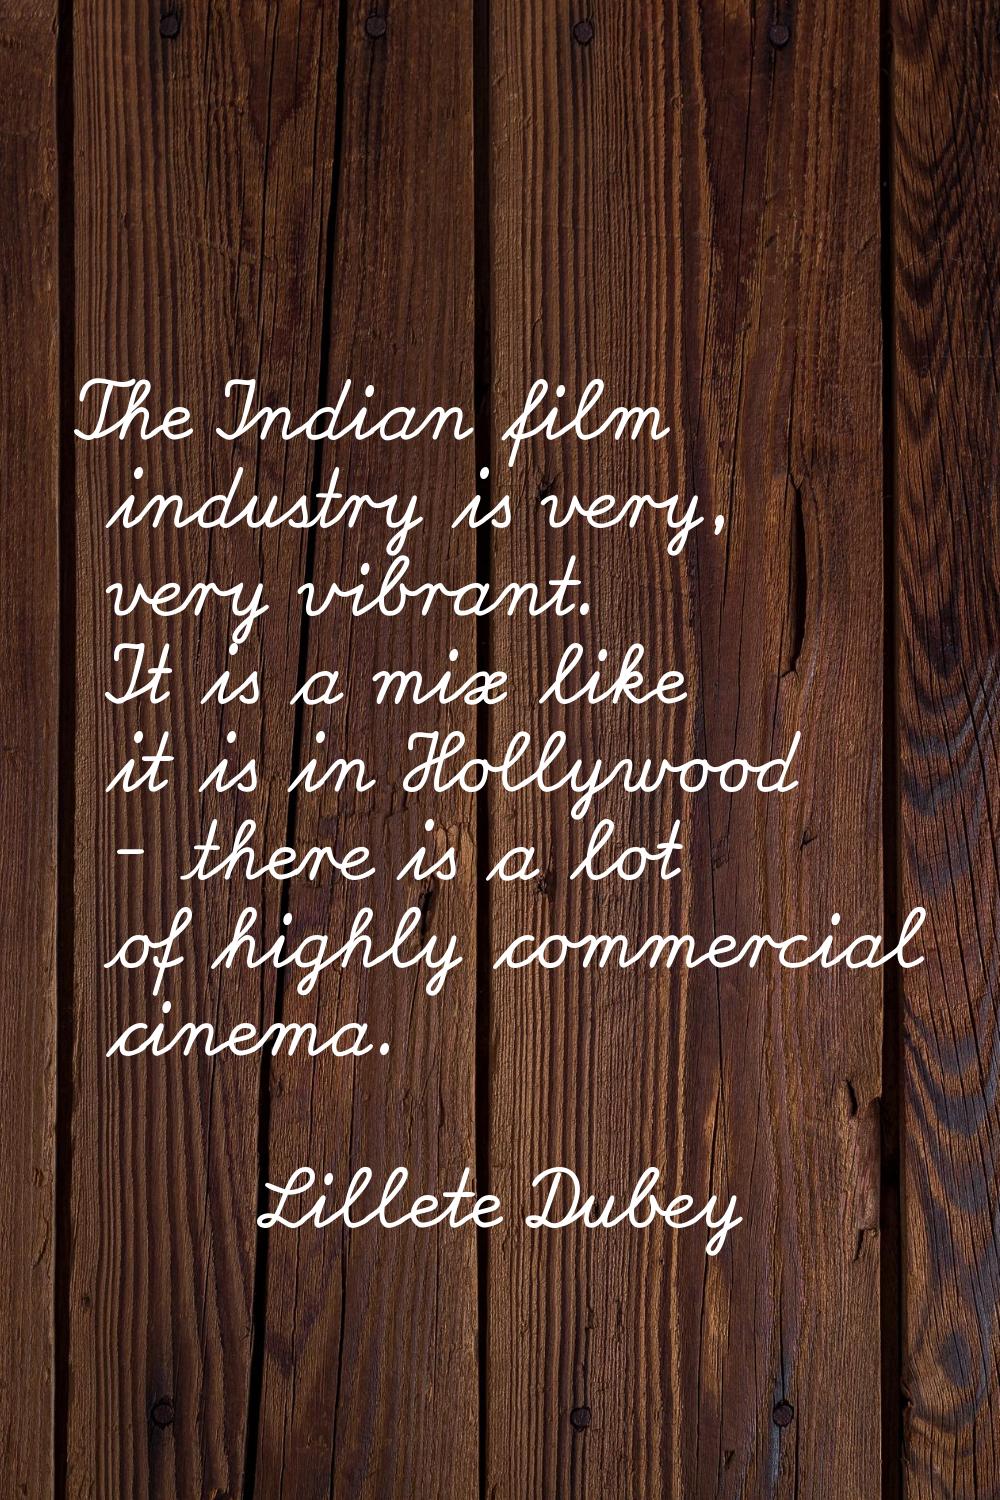 The Indian film industry is very, very vibrant. It is a mix like it is in Hollywood - there is a lo